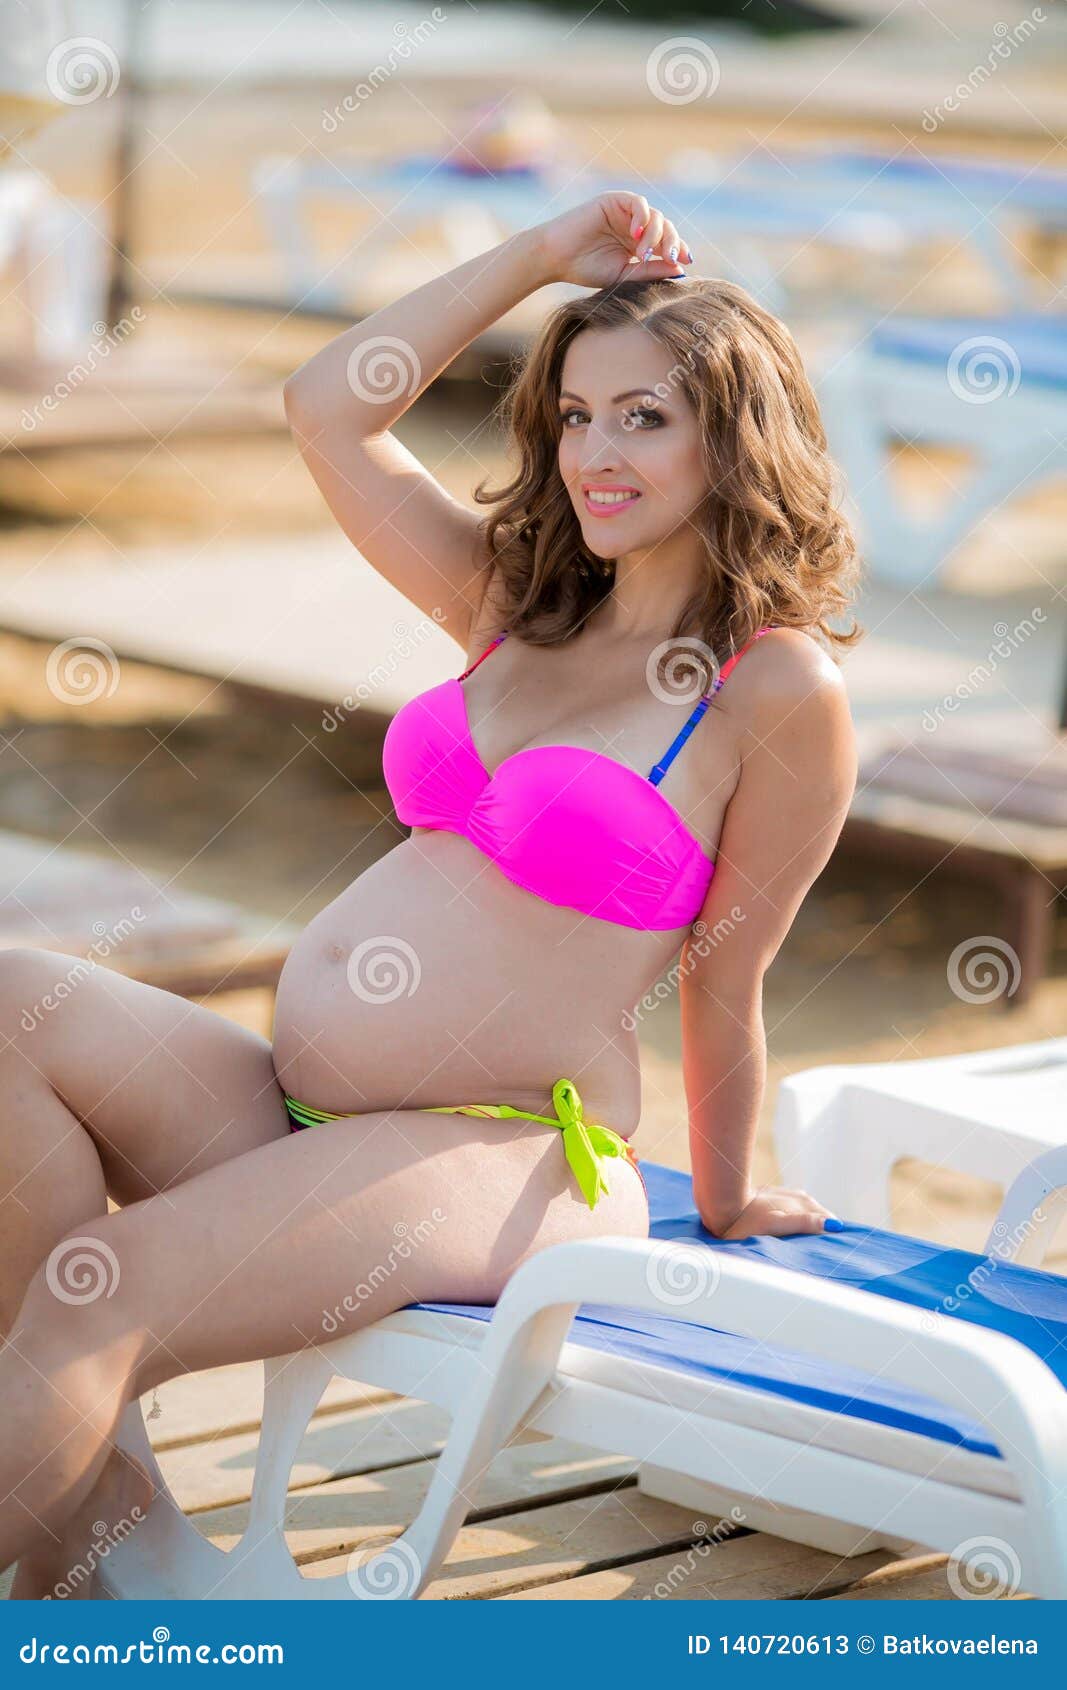 in Bikini on Lounge Chair Stock Image - Image of relax, adult: 140720613